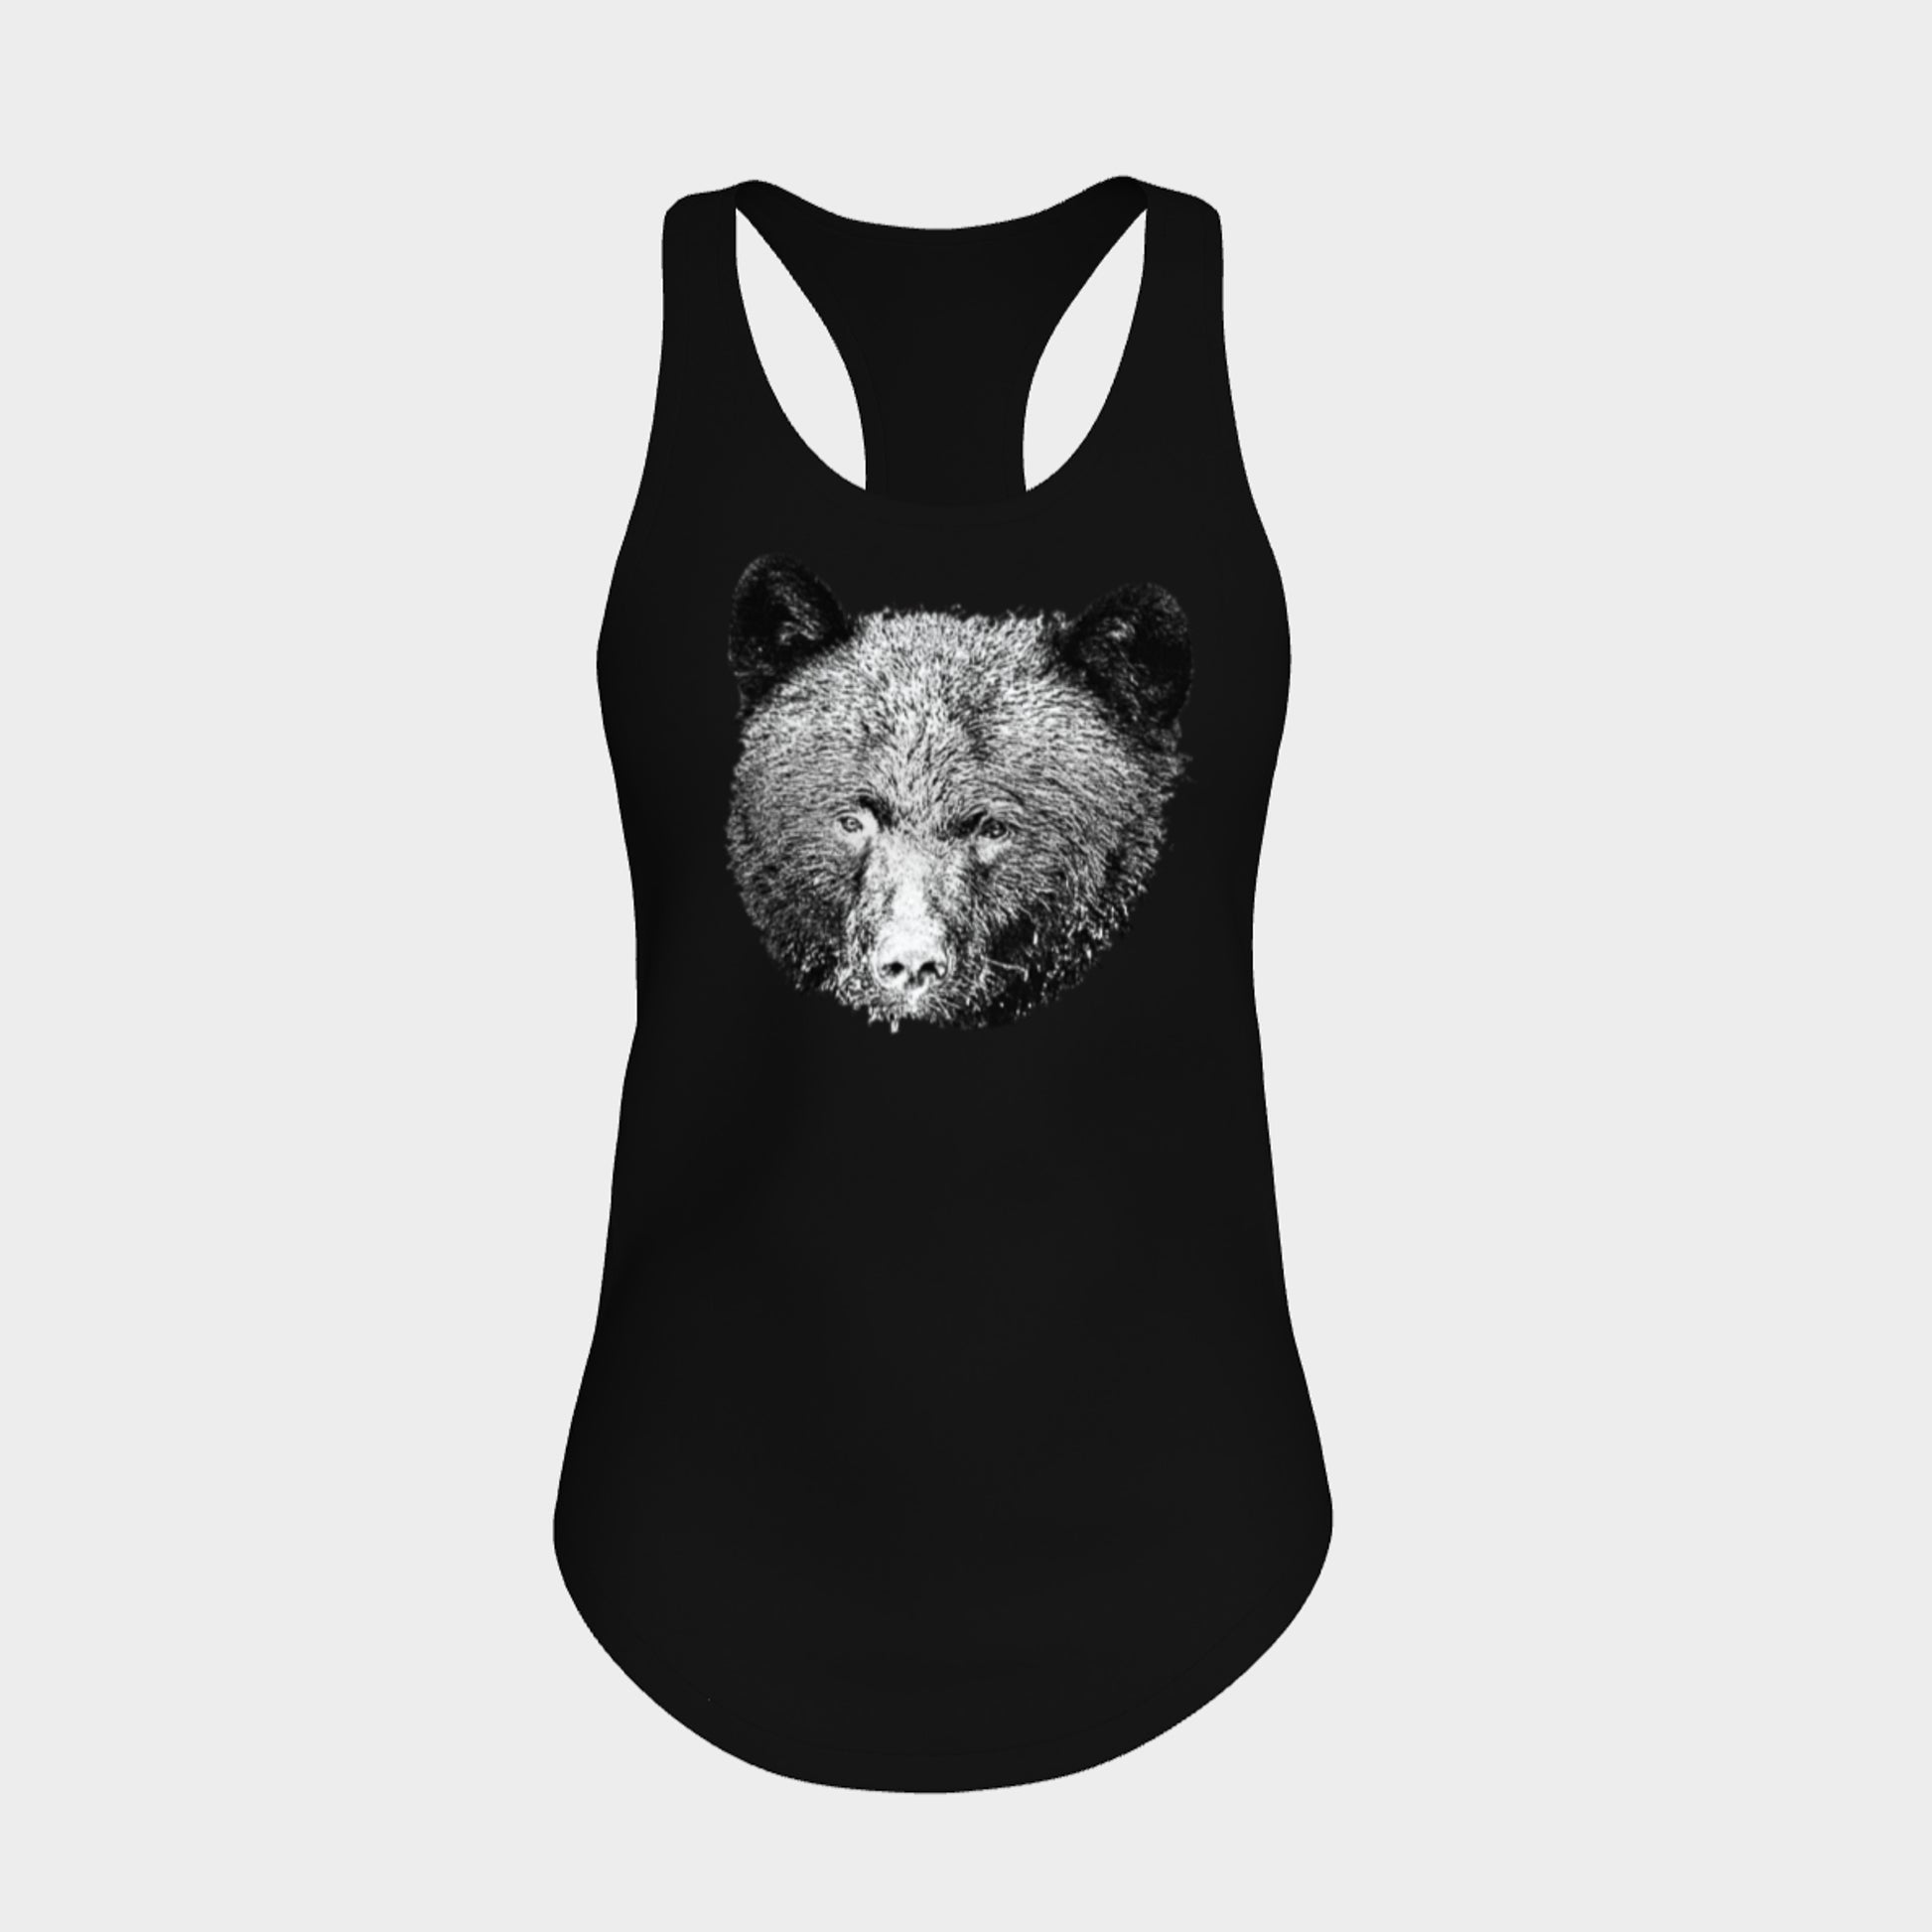 Bear Head Racerback tank top in tahiti blue made from a cotton polyester blend.